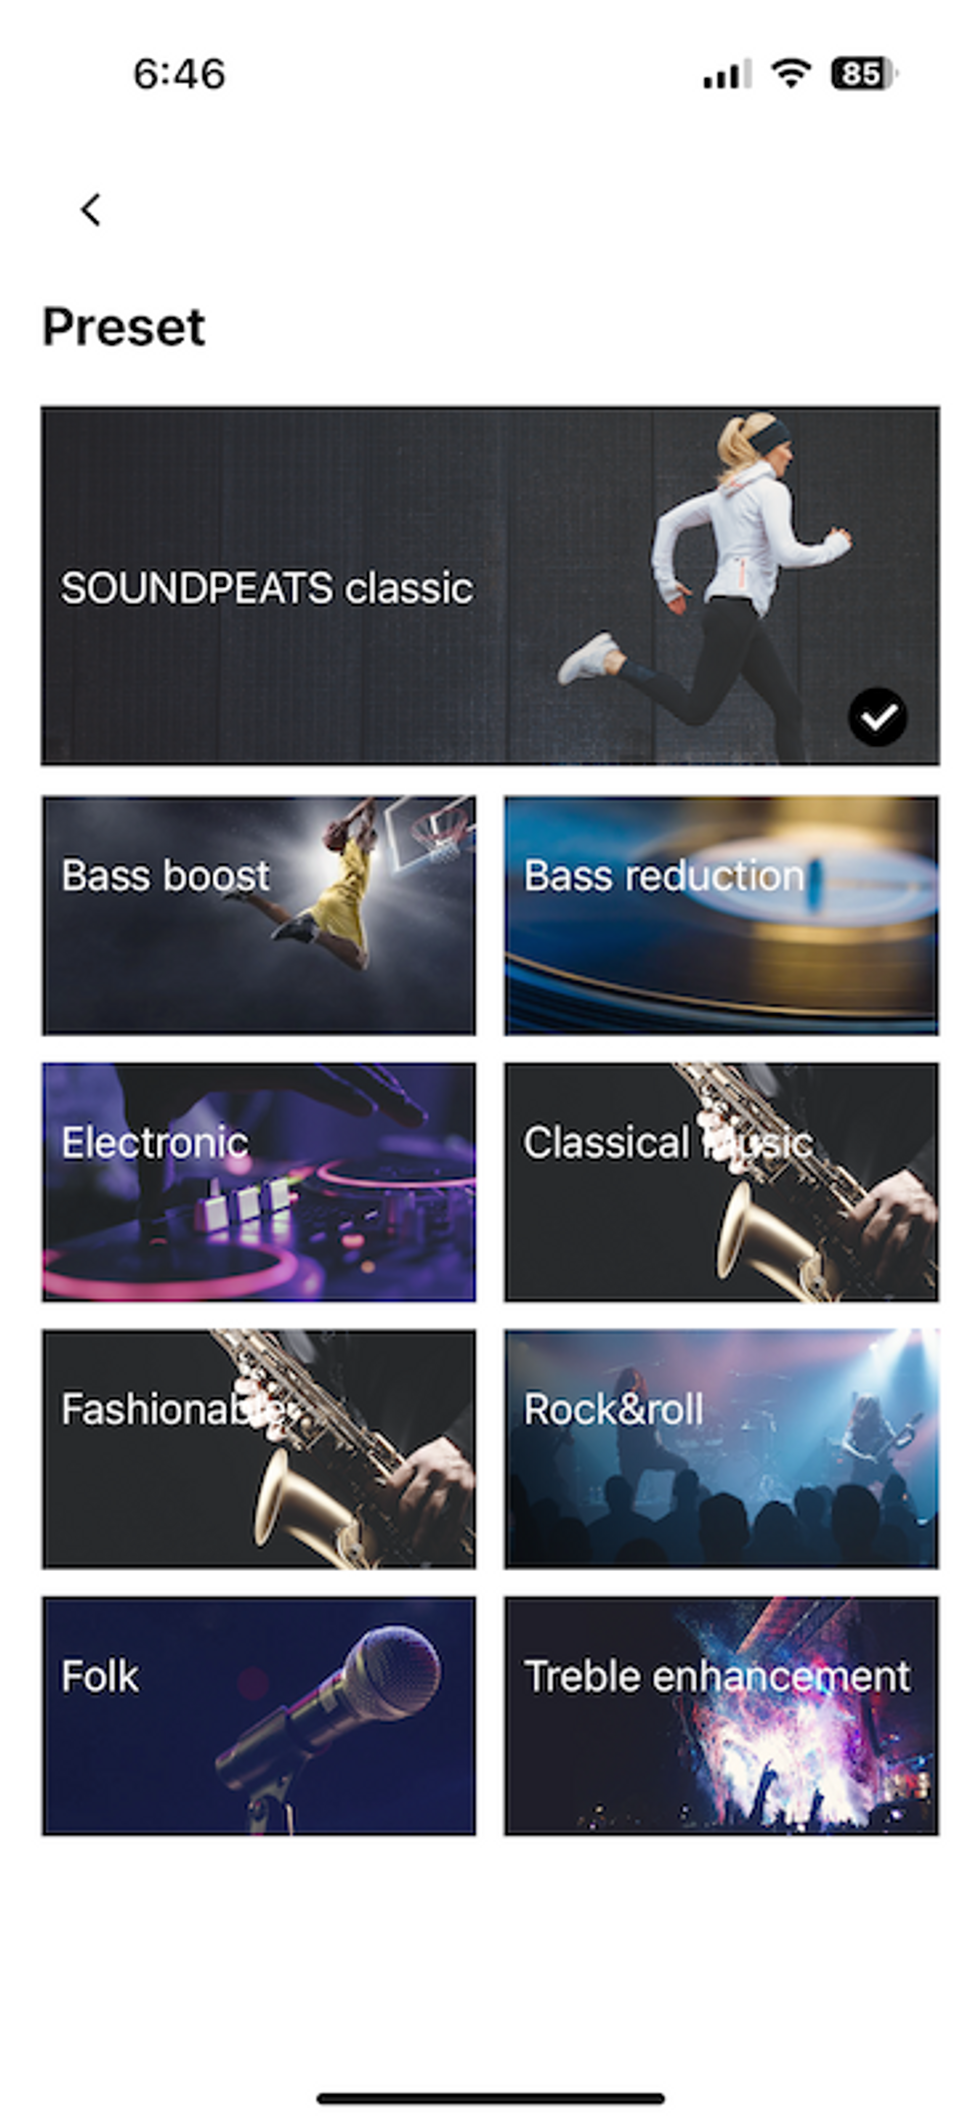 a screenshot of the presets in the SoundPEATS app